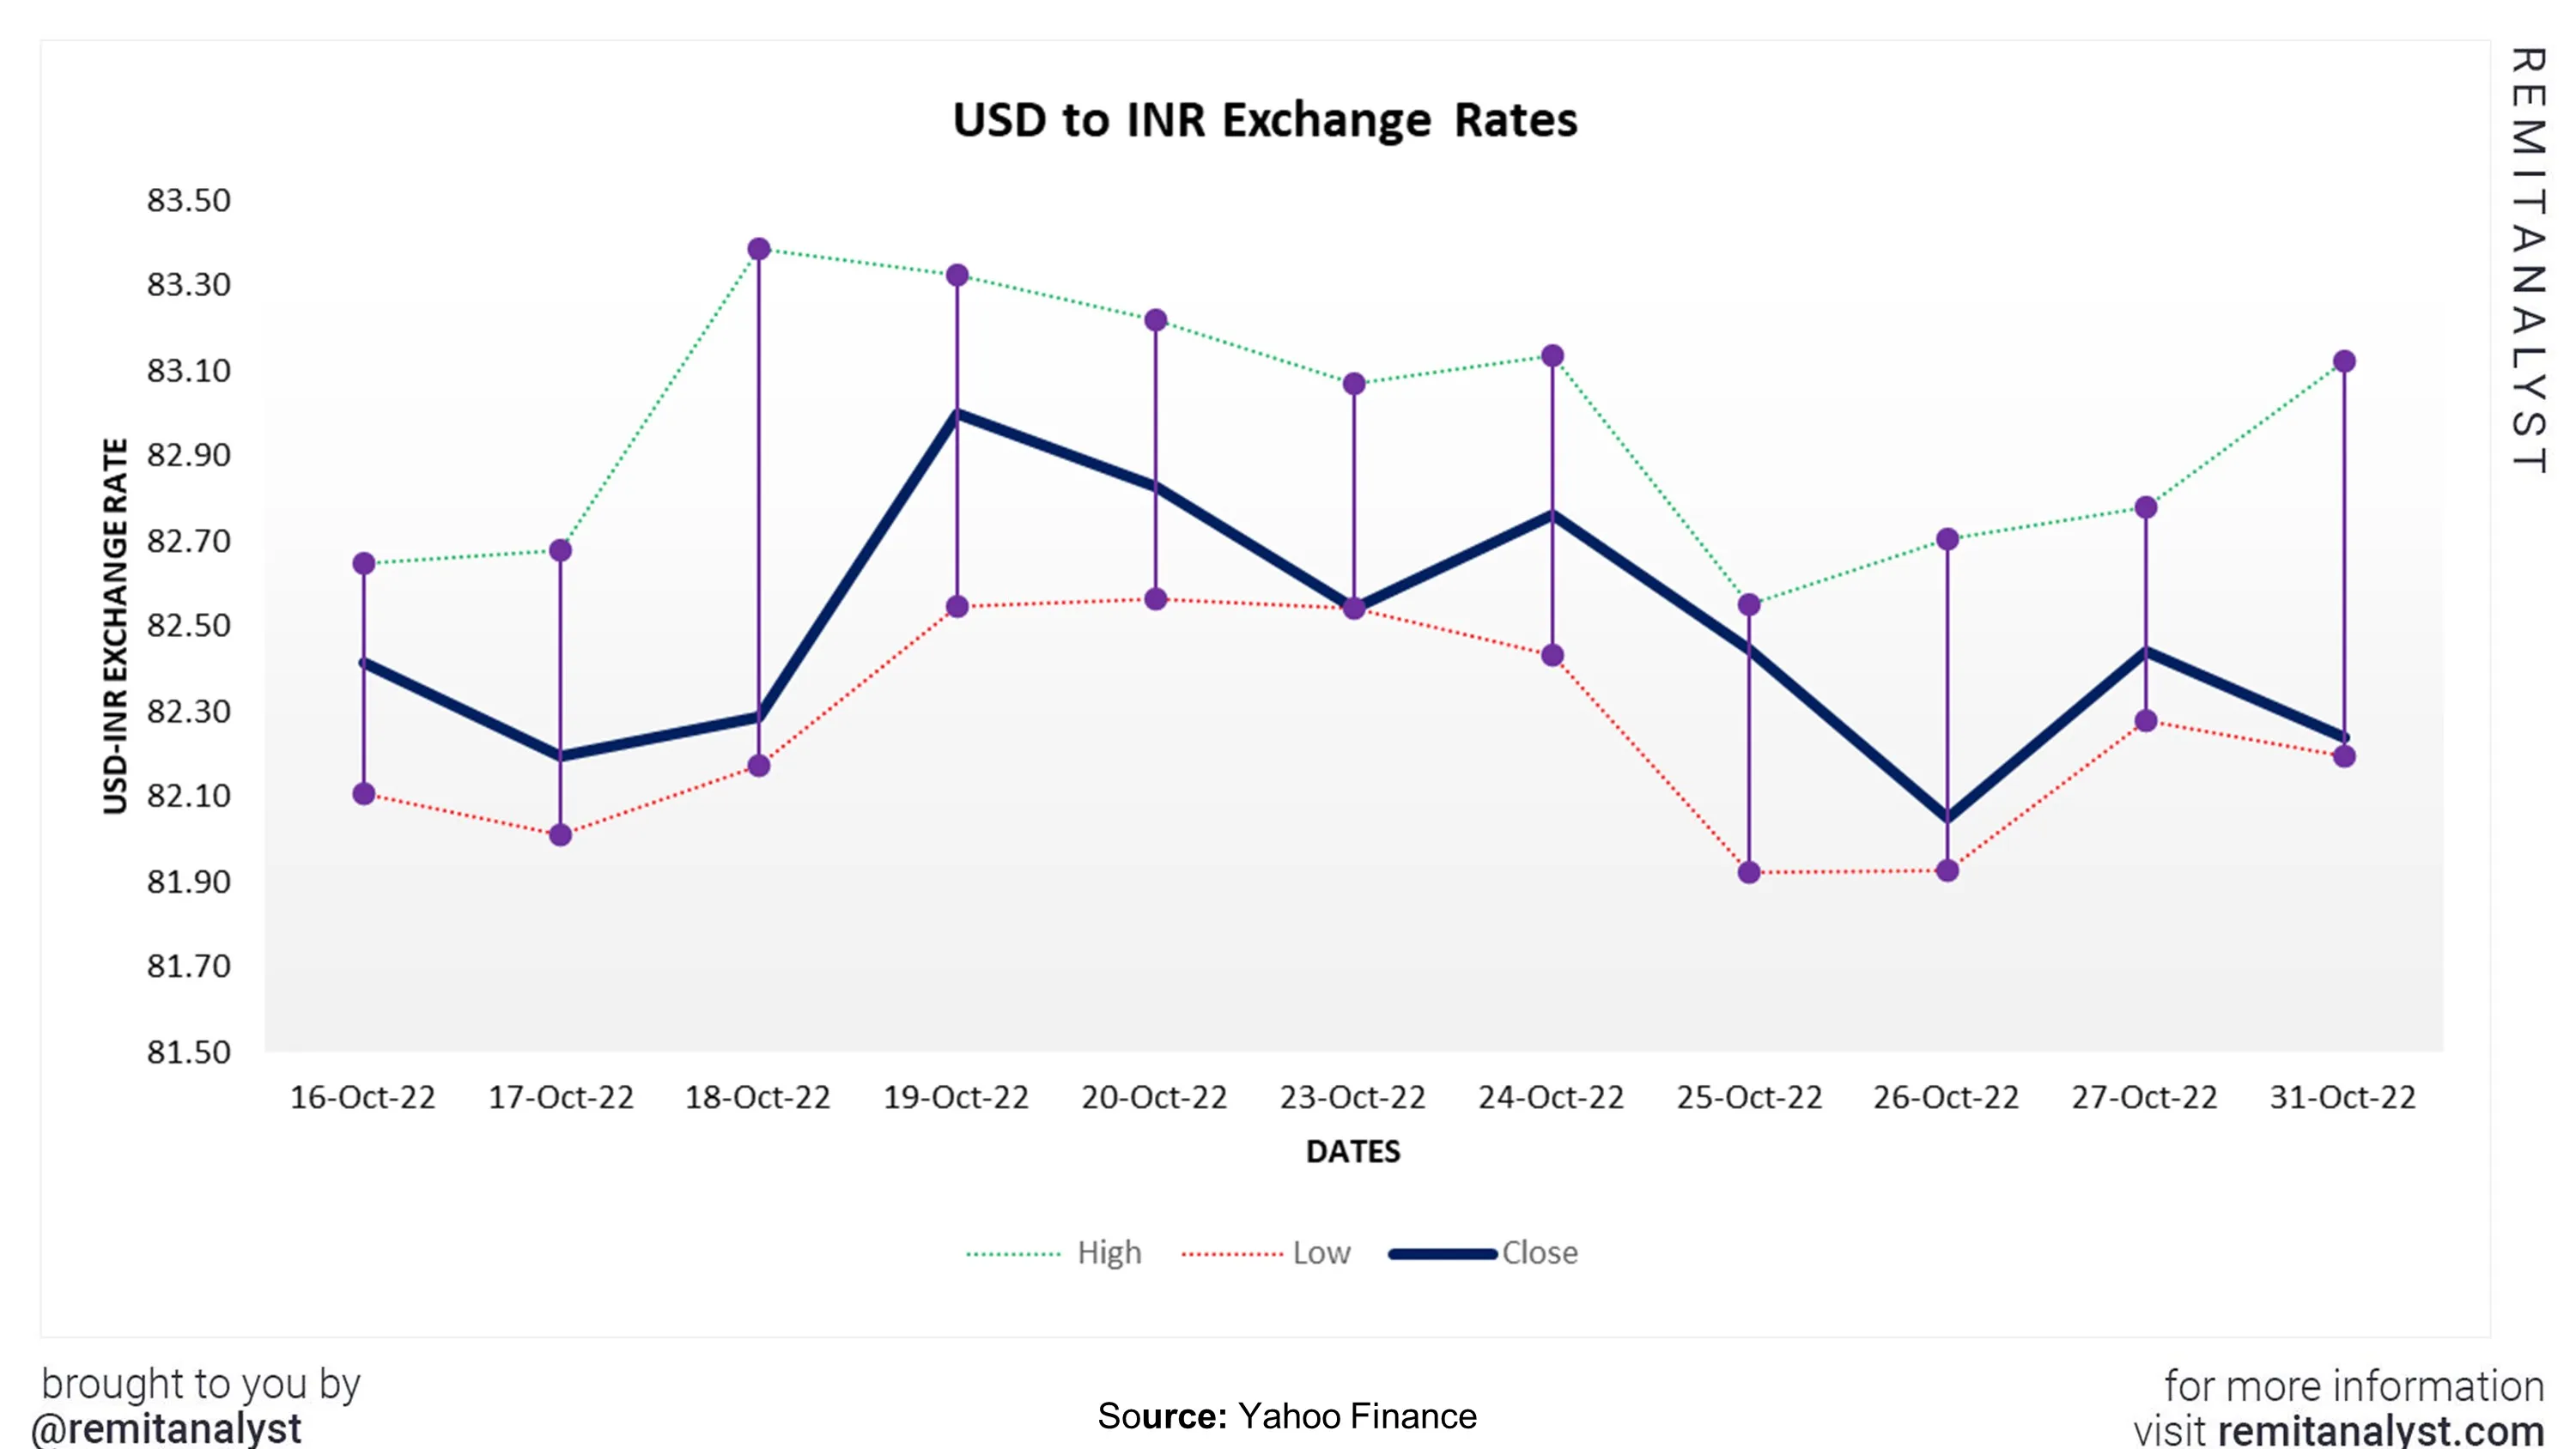 usd-to-inr-exchange-rate-from-16-oct-2022-to-31-oct-2022